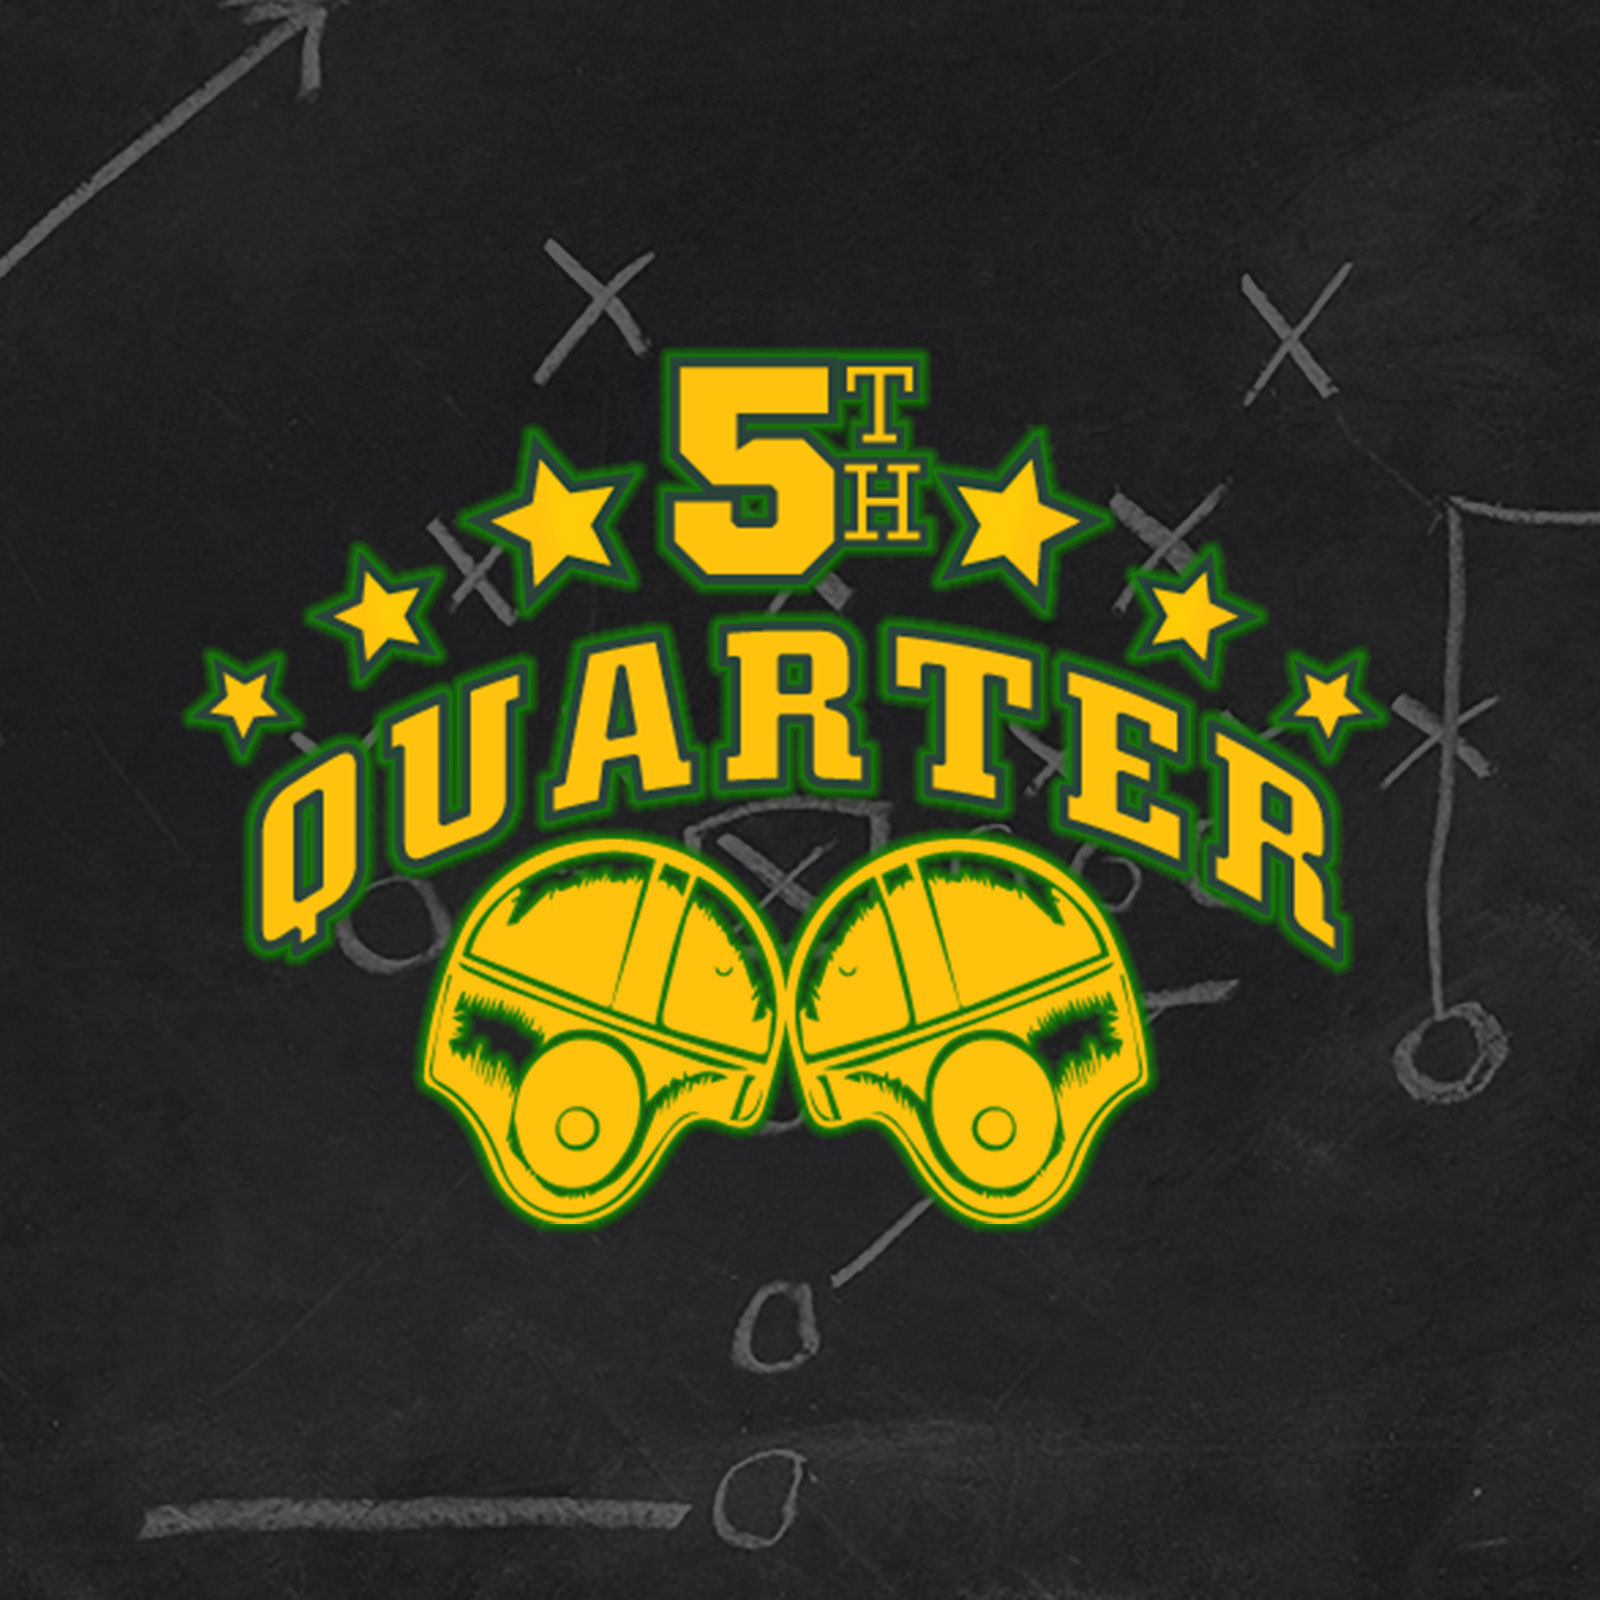 5th Quarter On Demand Audio - Full Show with Jeff Janis on 10/9/17